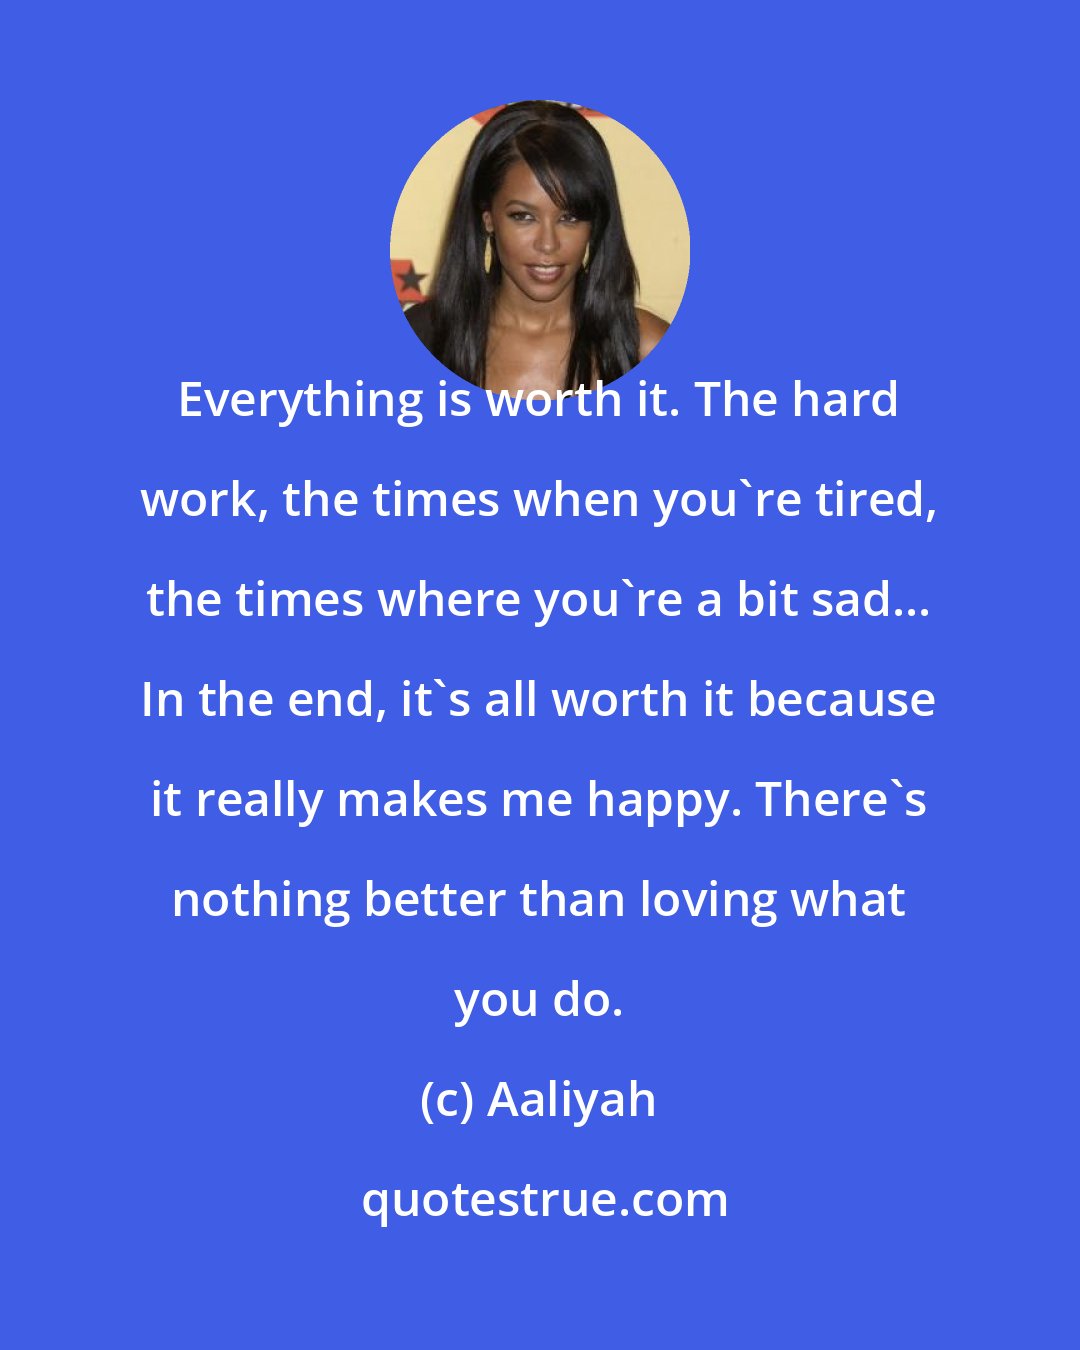 Aaliyah: Everything is worth it. The hard work, the times when you're tired, the times where you're a bit sad... In the end, it's all worth it because it really makes me happy. There's nothing better than loving what you do.